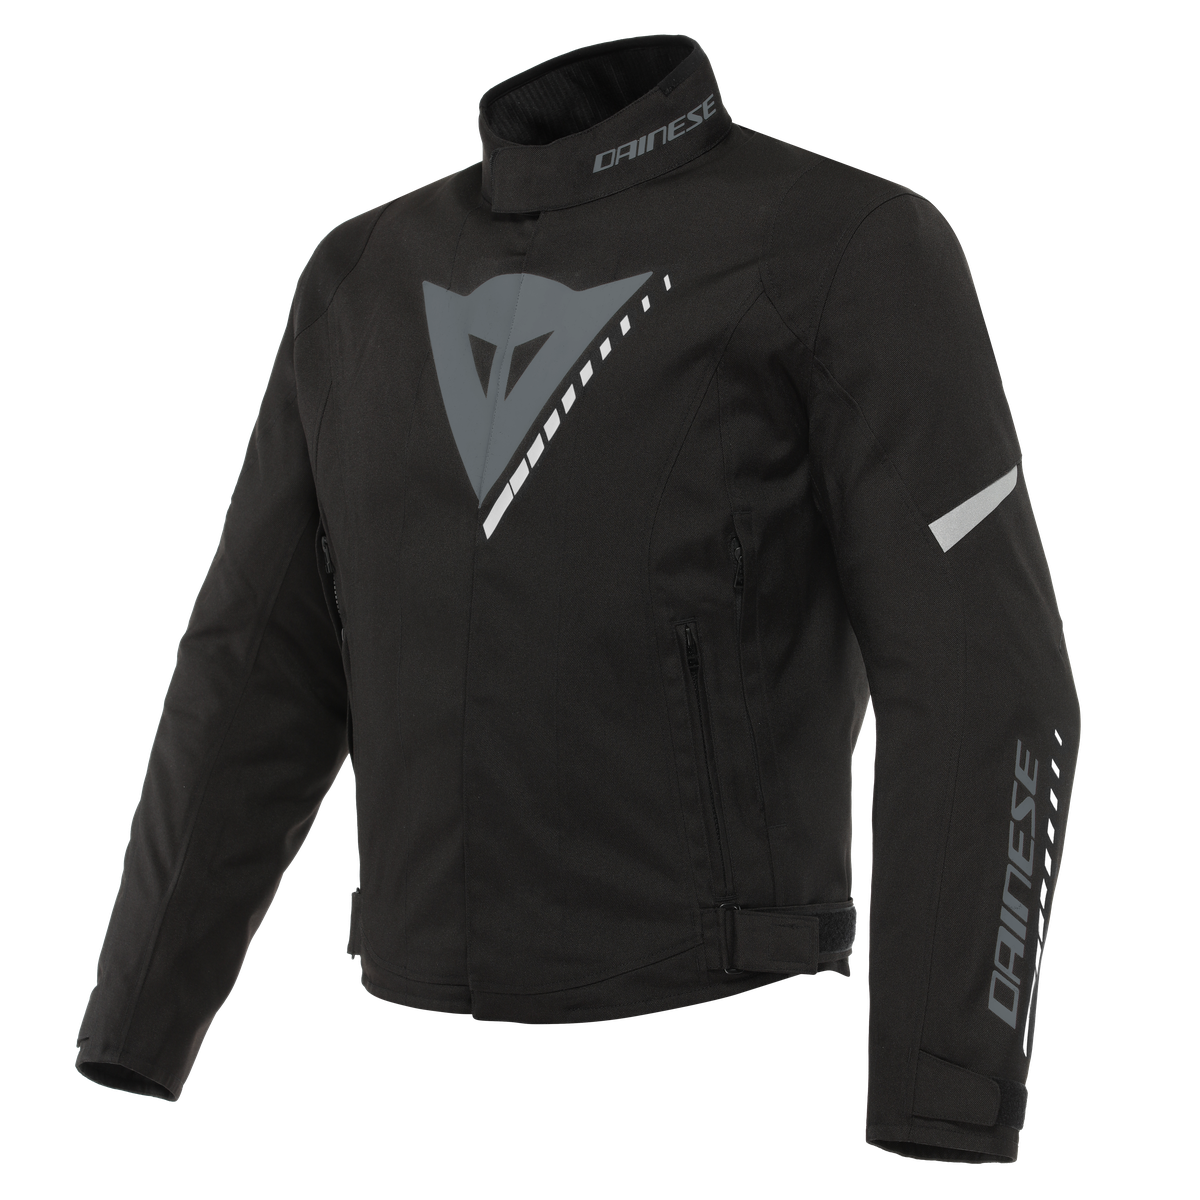 Image of Dainese Veloce D-Dry Jacket Black Charcoal Gray White Size 44 ID 8051019387370